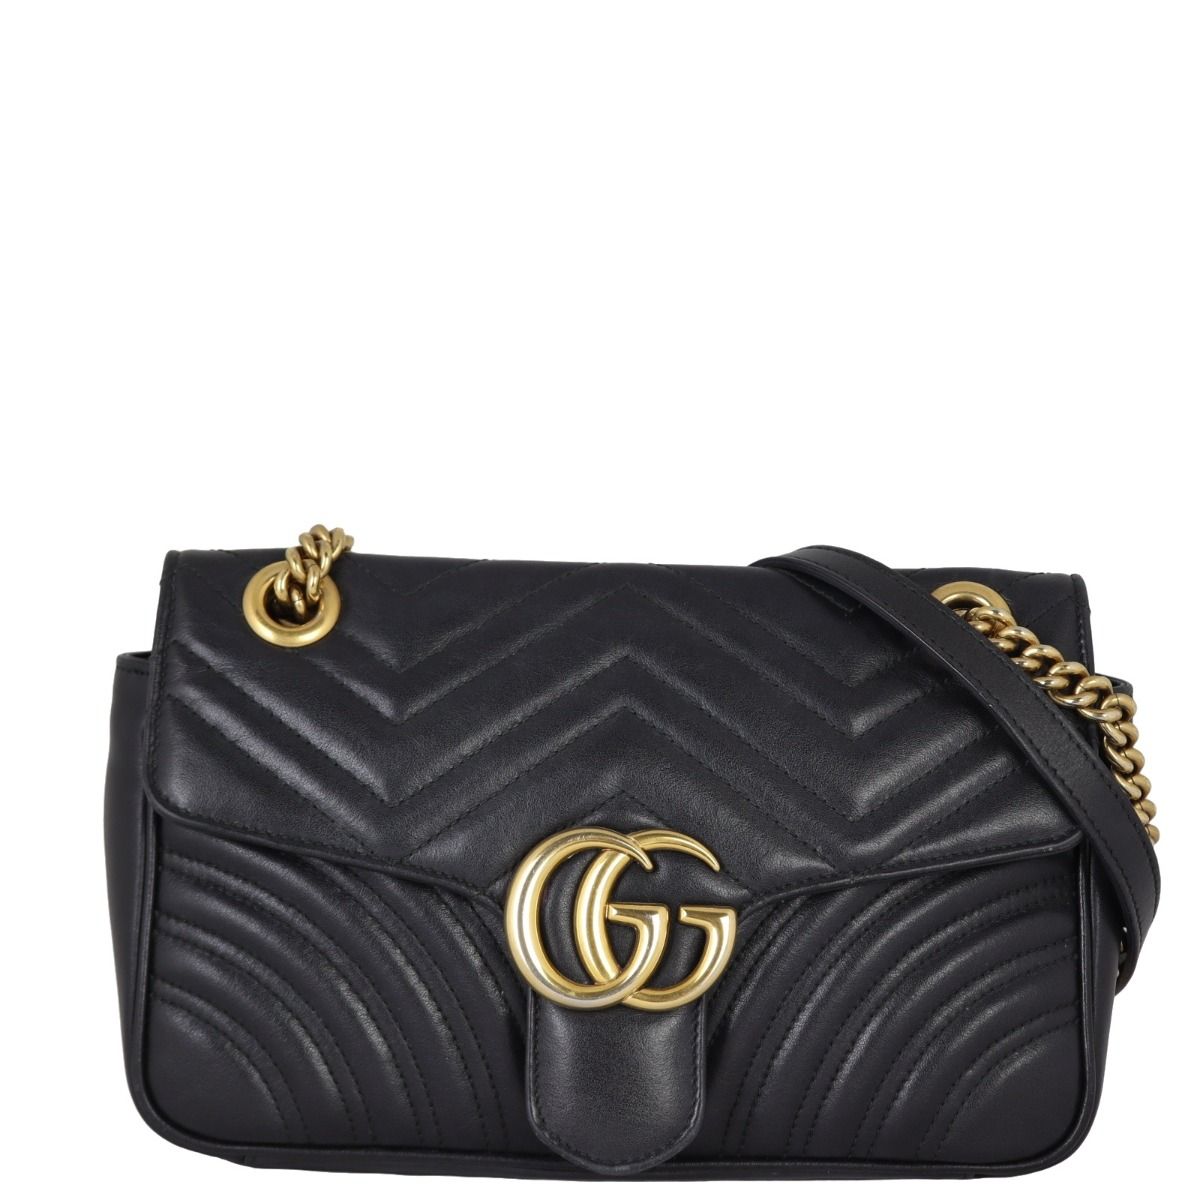 Gucci - GG Marmont Small Quilted Leather Shoulder Bag - Black